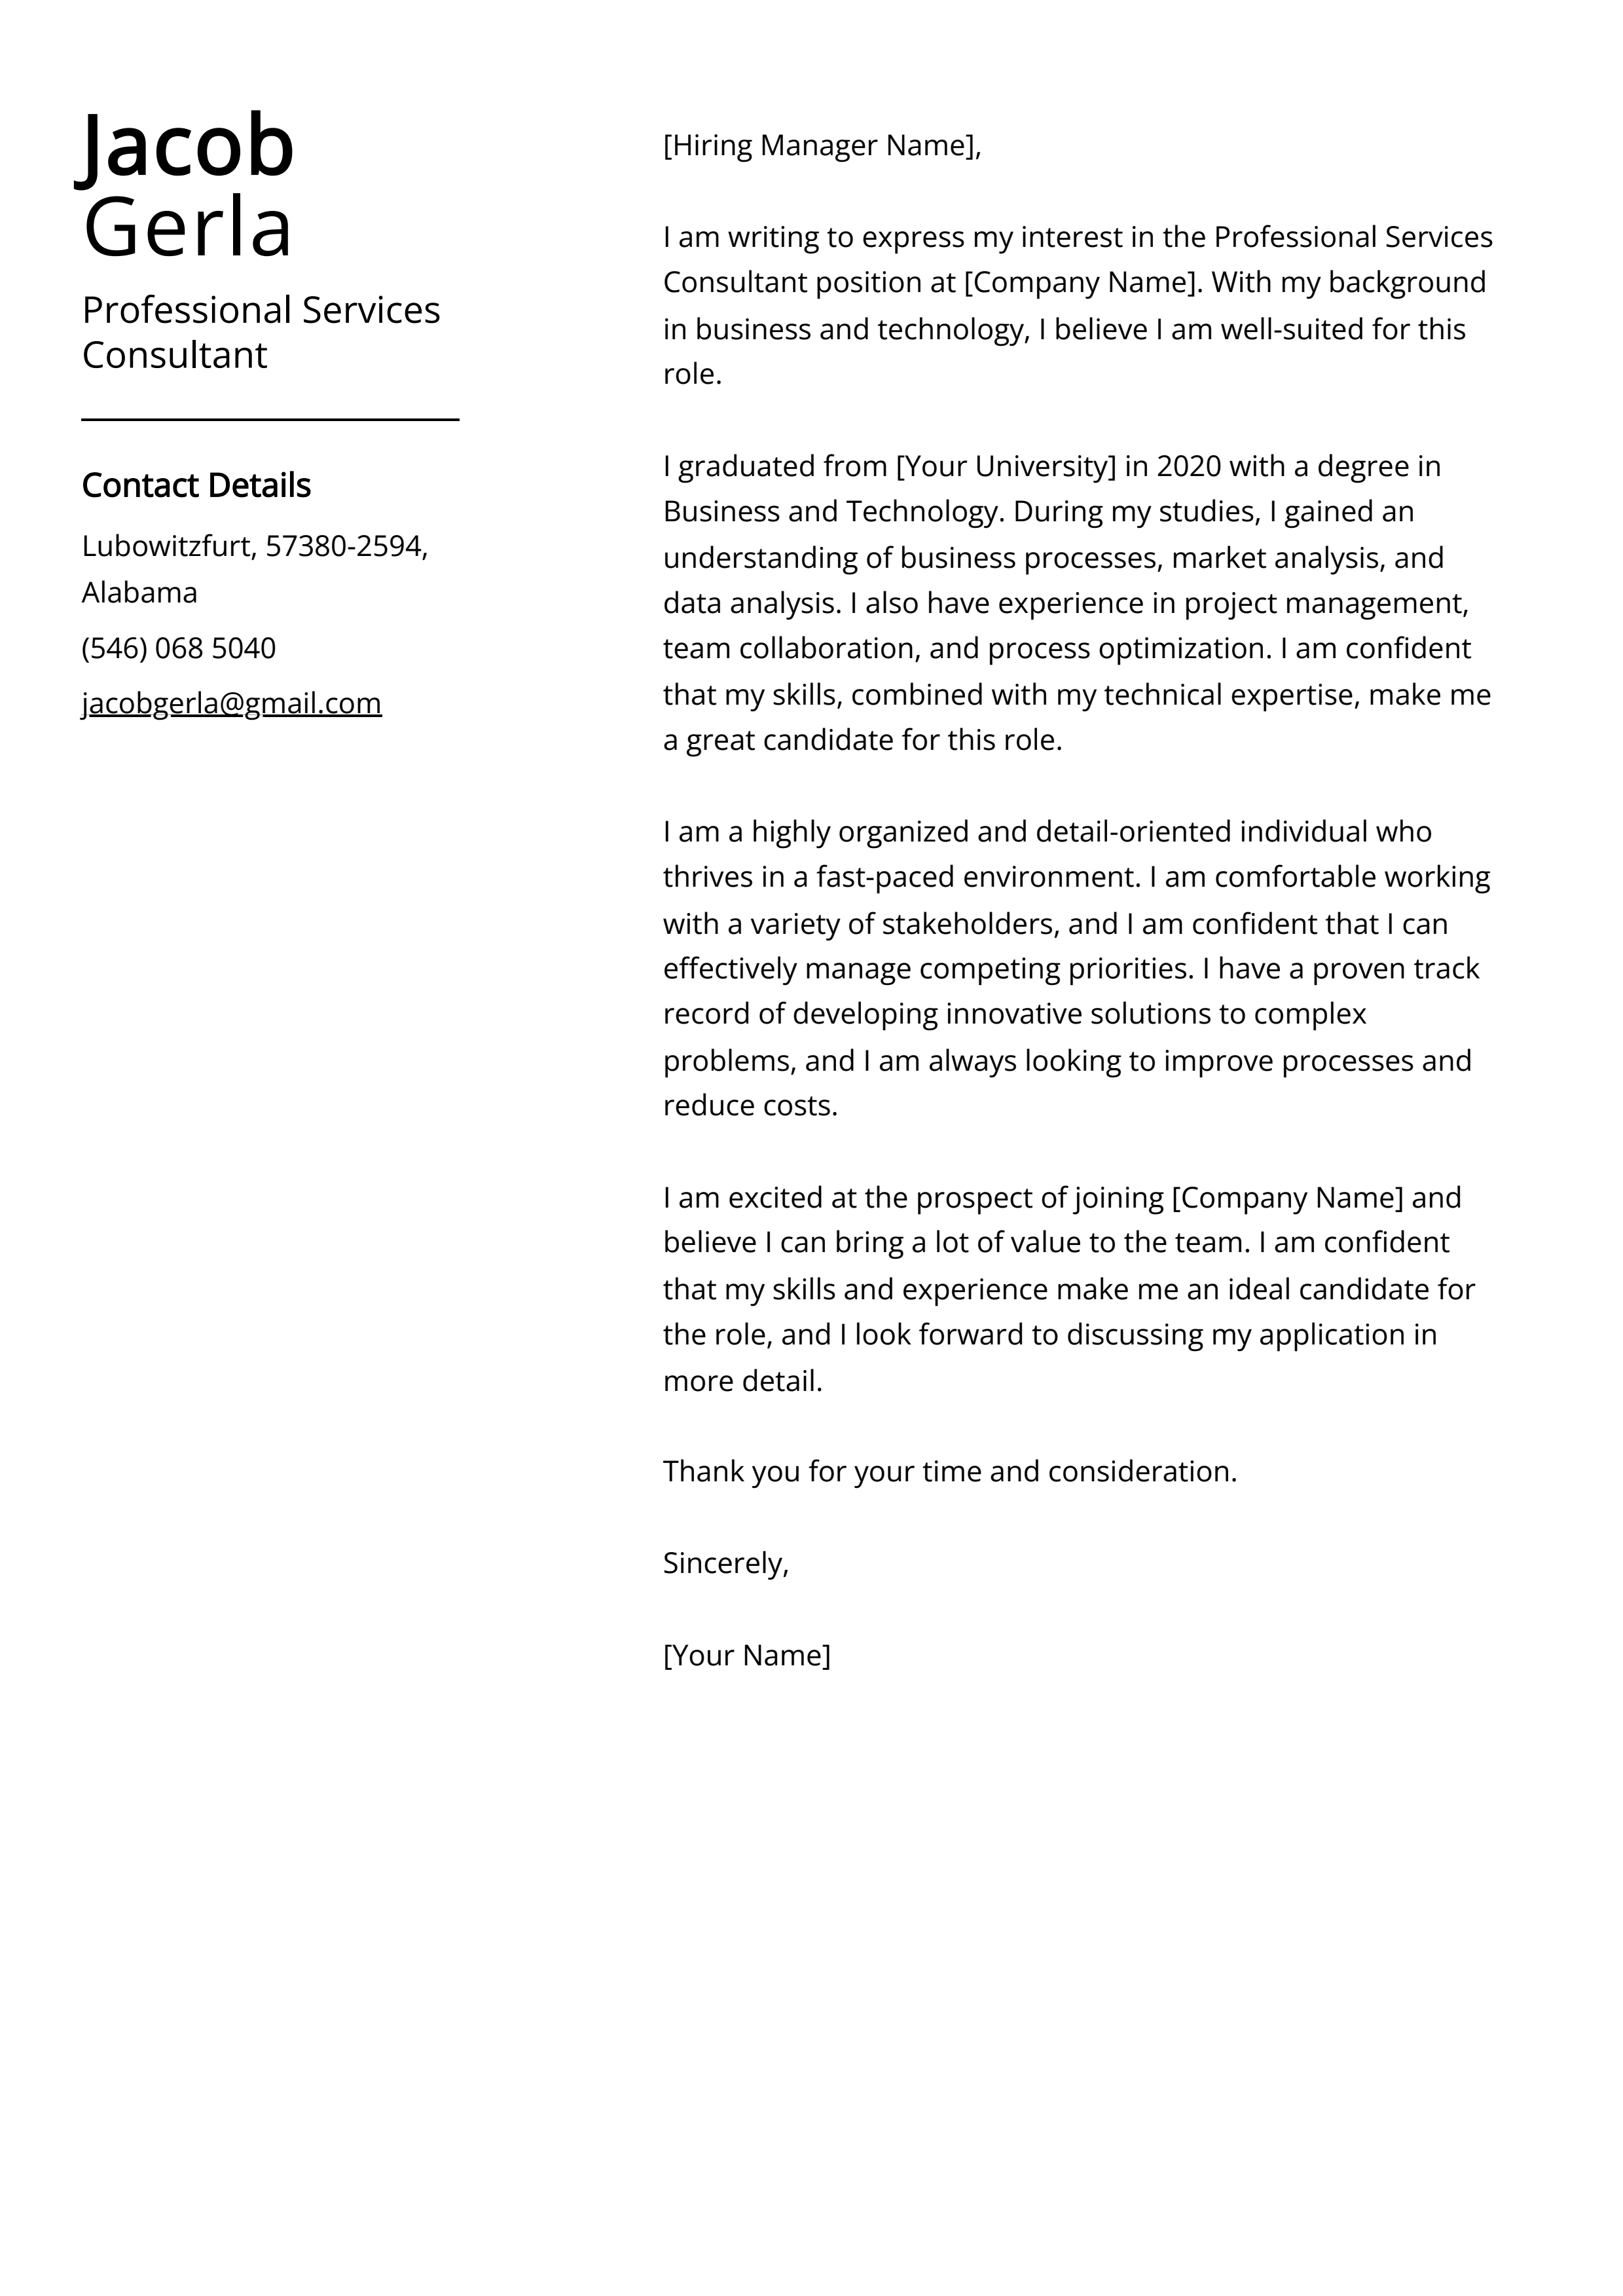 Professional Services Consultant Cover Letter Example